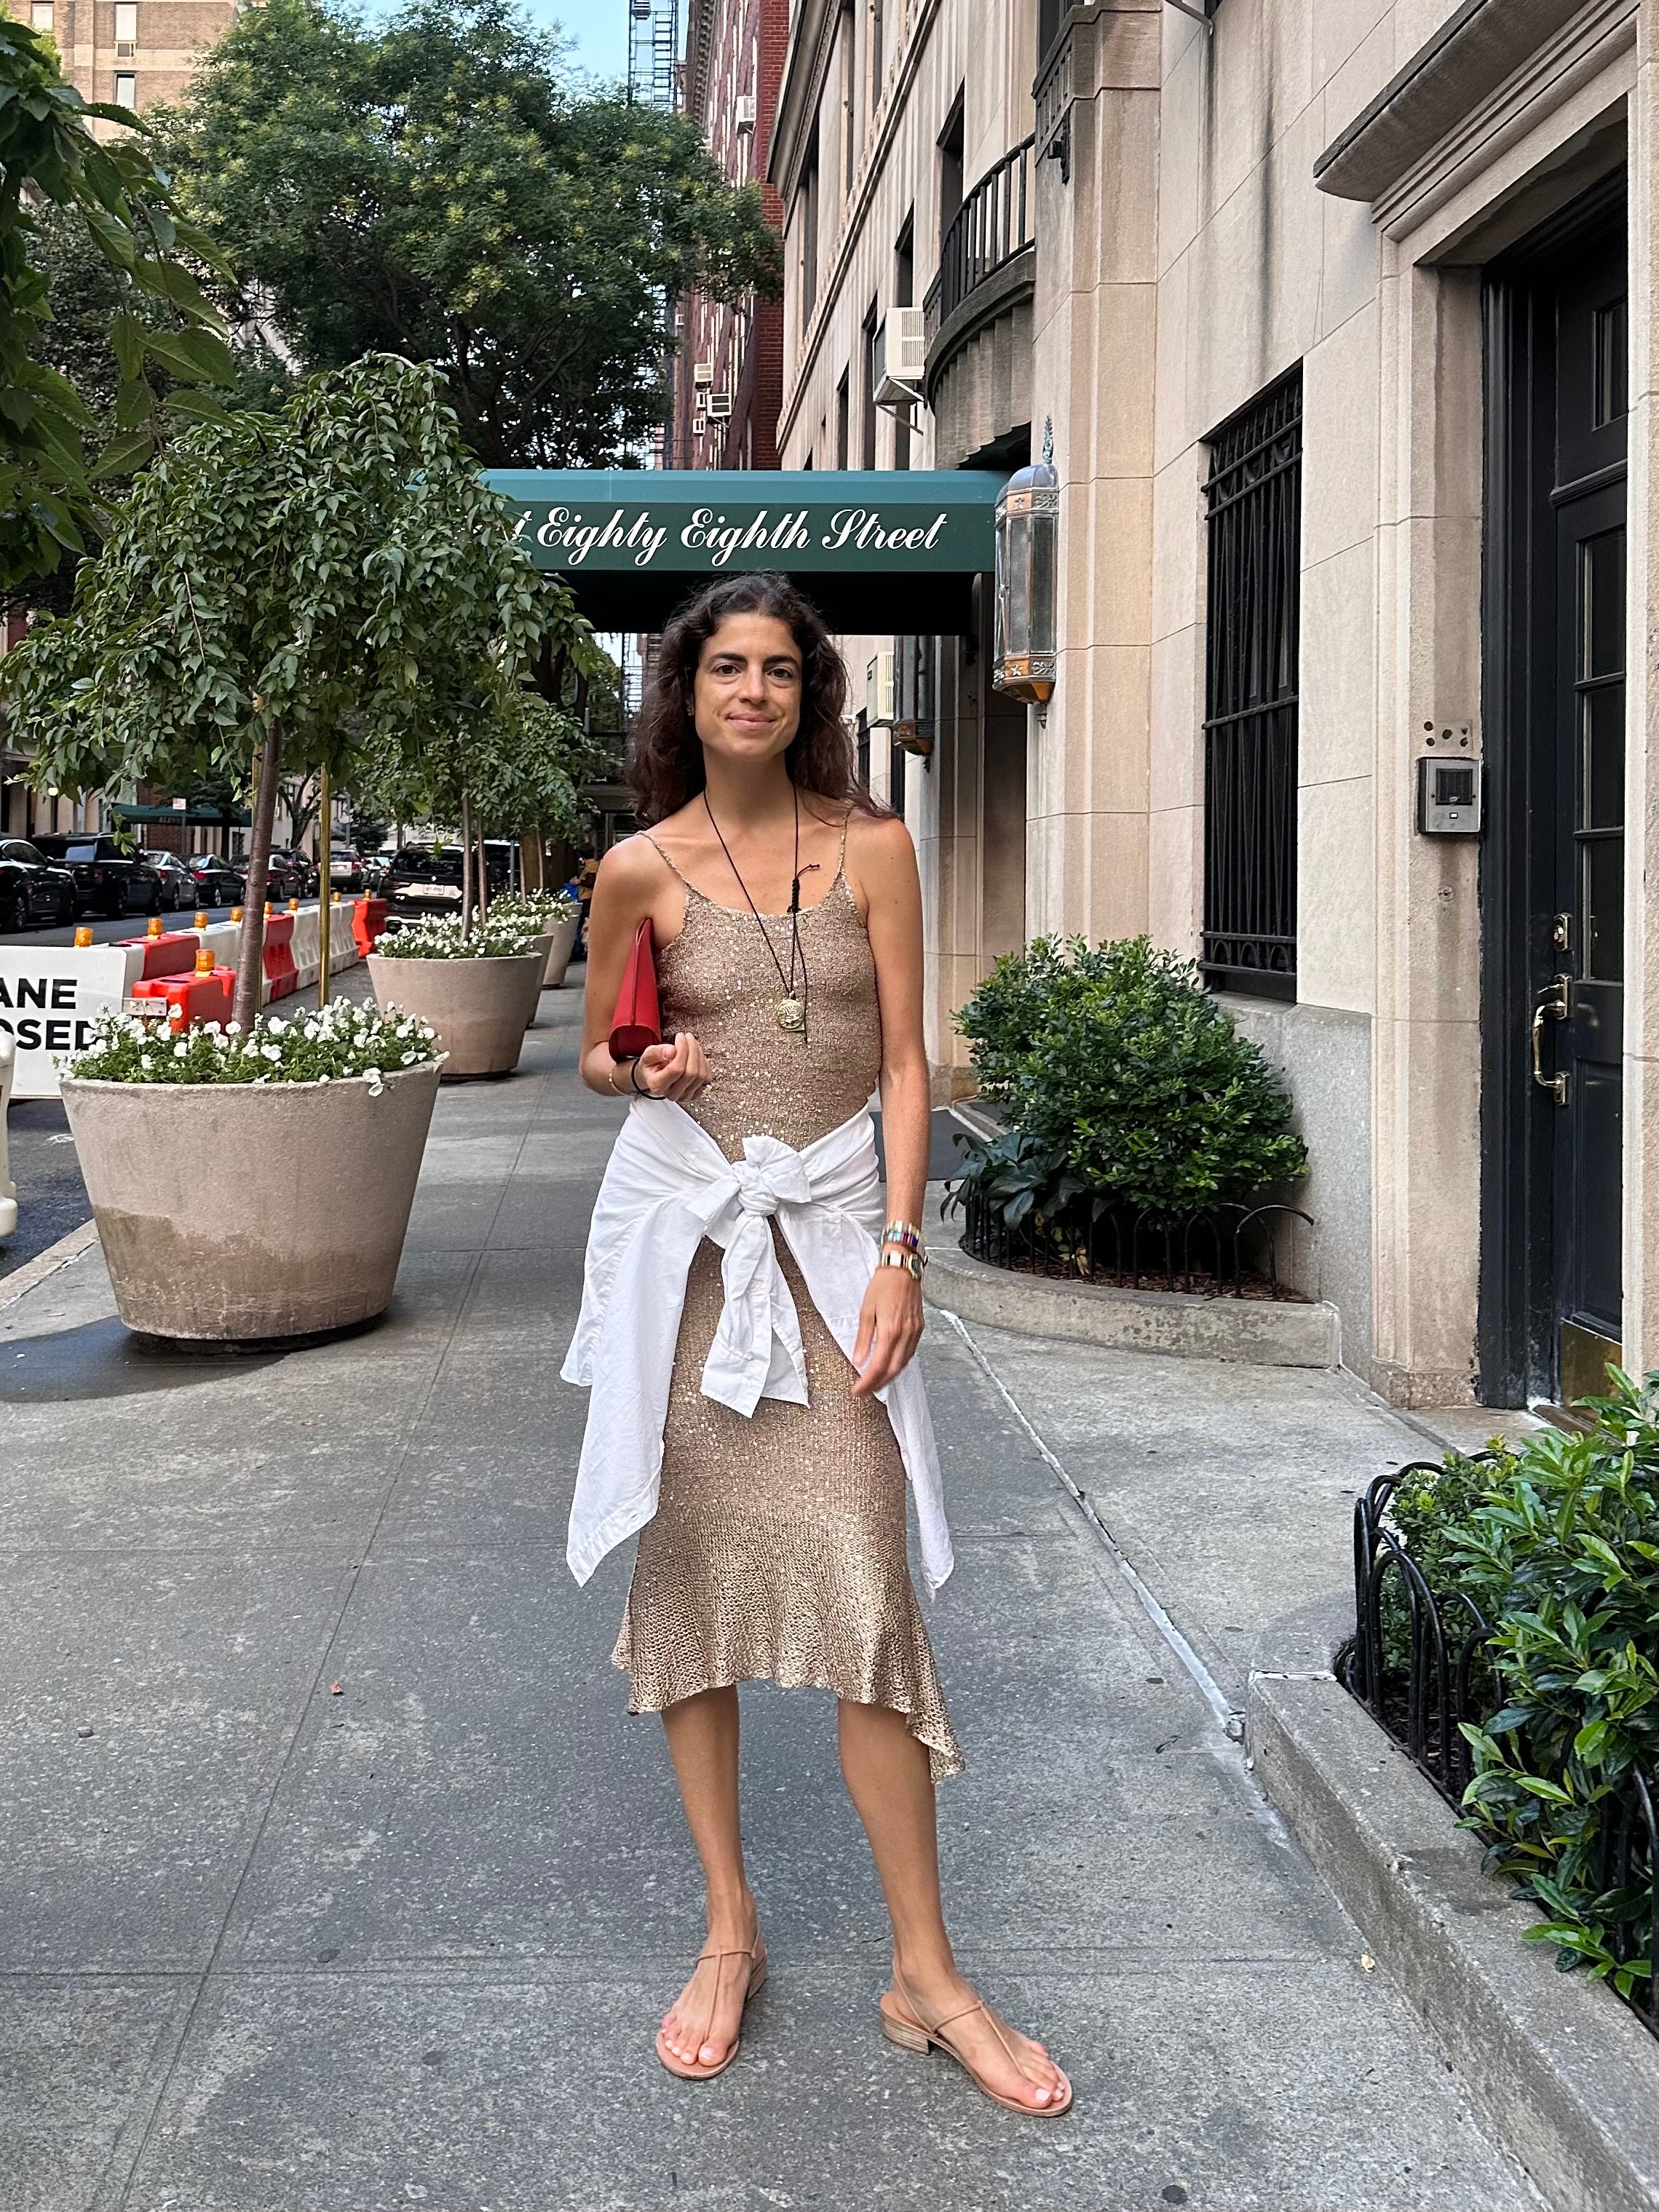 Great summer dresses – to and Leandra how wear Cafe them